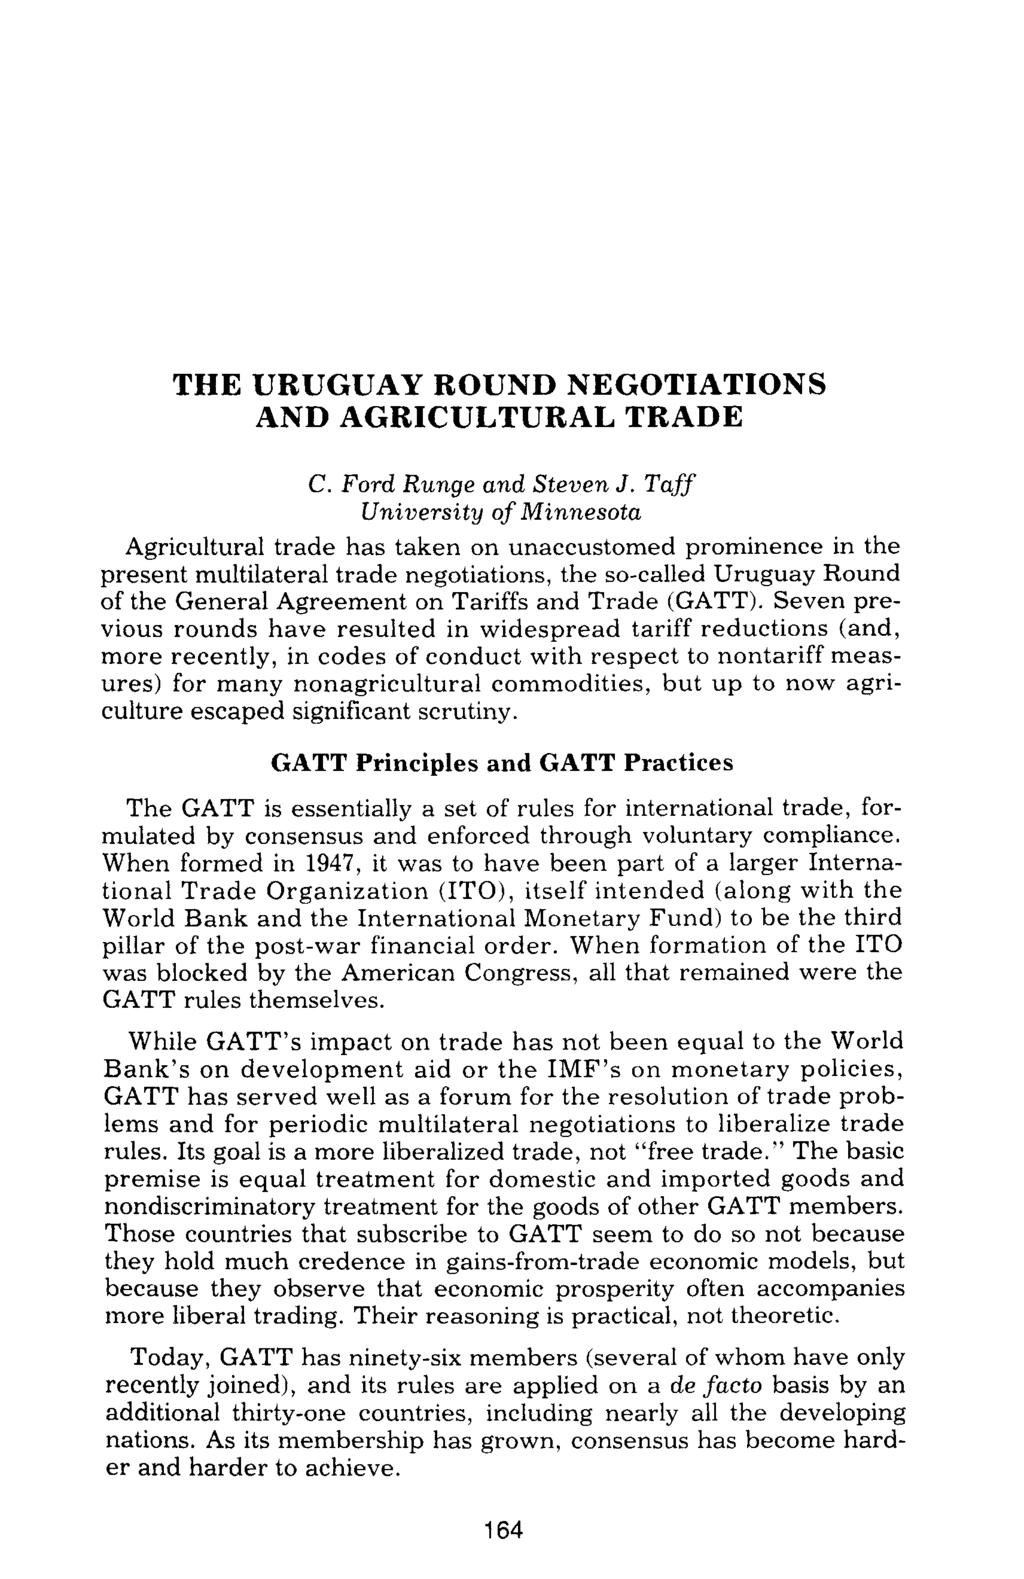 THE URUGUAY ROUND NEGOTIATIONS AND AGRICULTURAL TRADE C. Ford Runge and Steven J.